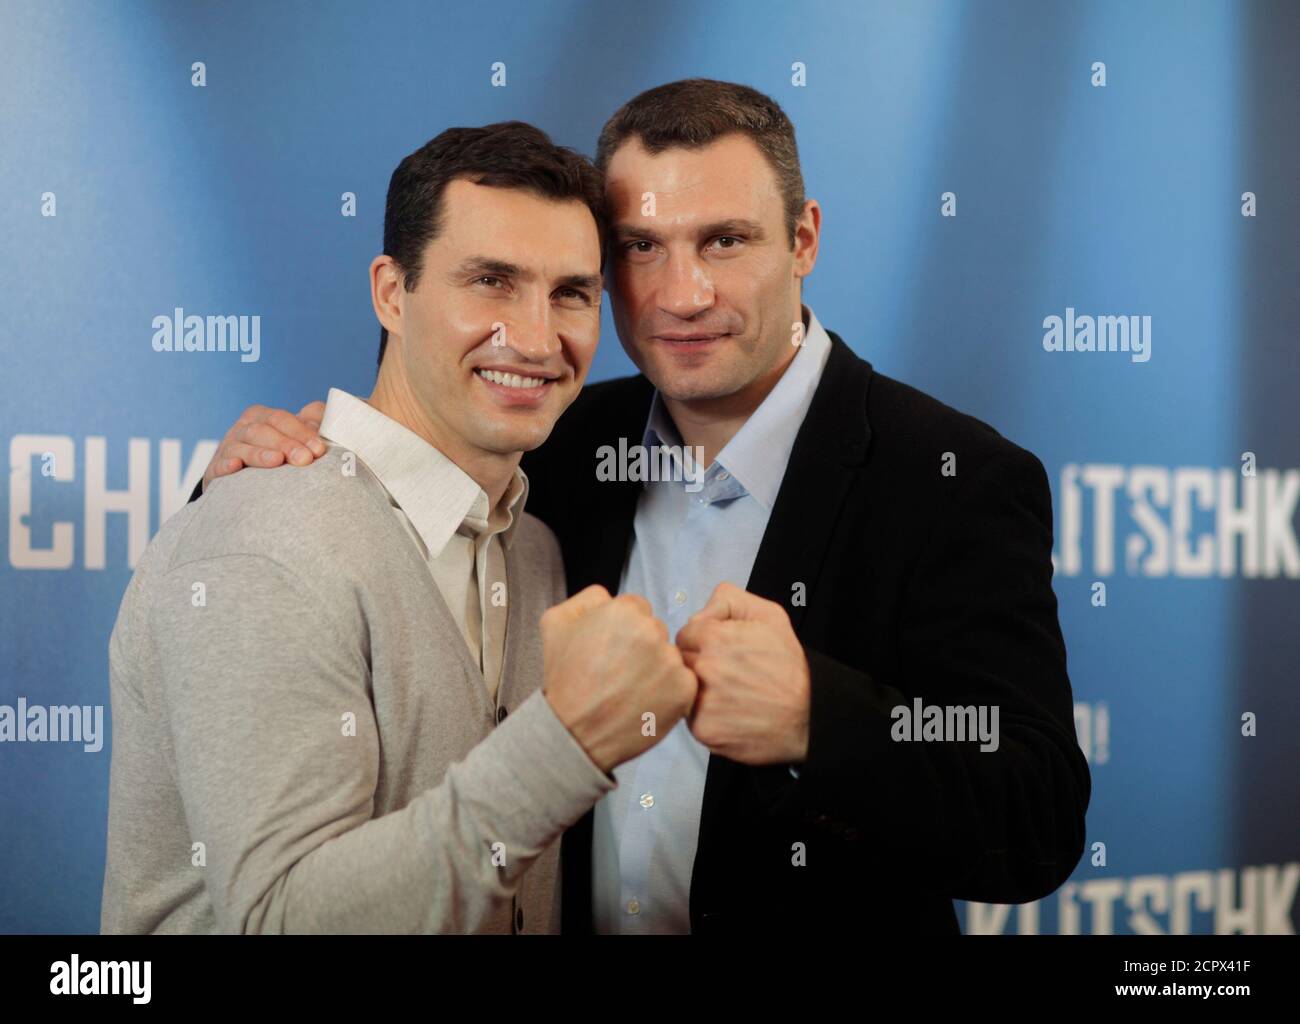 Ukrainian boxers Wladimir (L) and Vitali Klitschko pose for pictures as  they promote their movie 'Klitschko' in Berlin, April 7, 2011.  REUTERS/Thomas Peter (GERMANY - Tags: ENTERTAINMENT SPORT BOXING Stock  Photo - Alamy